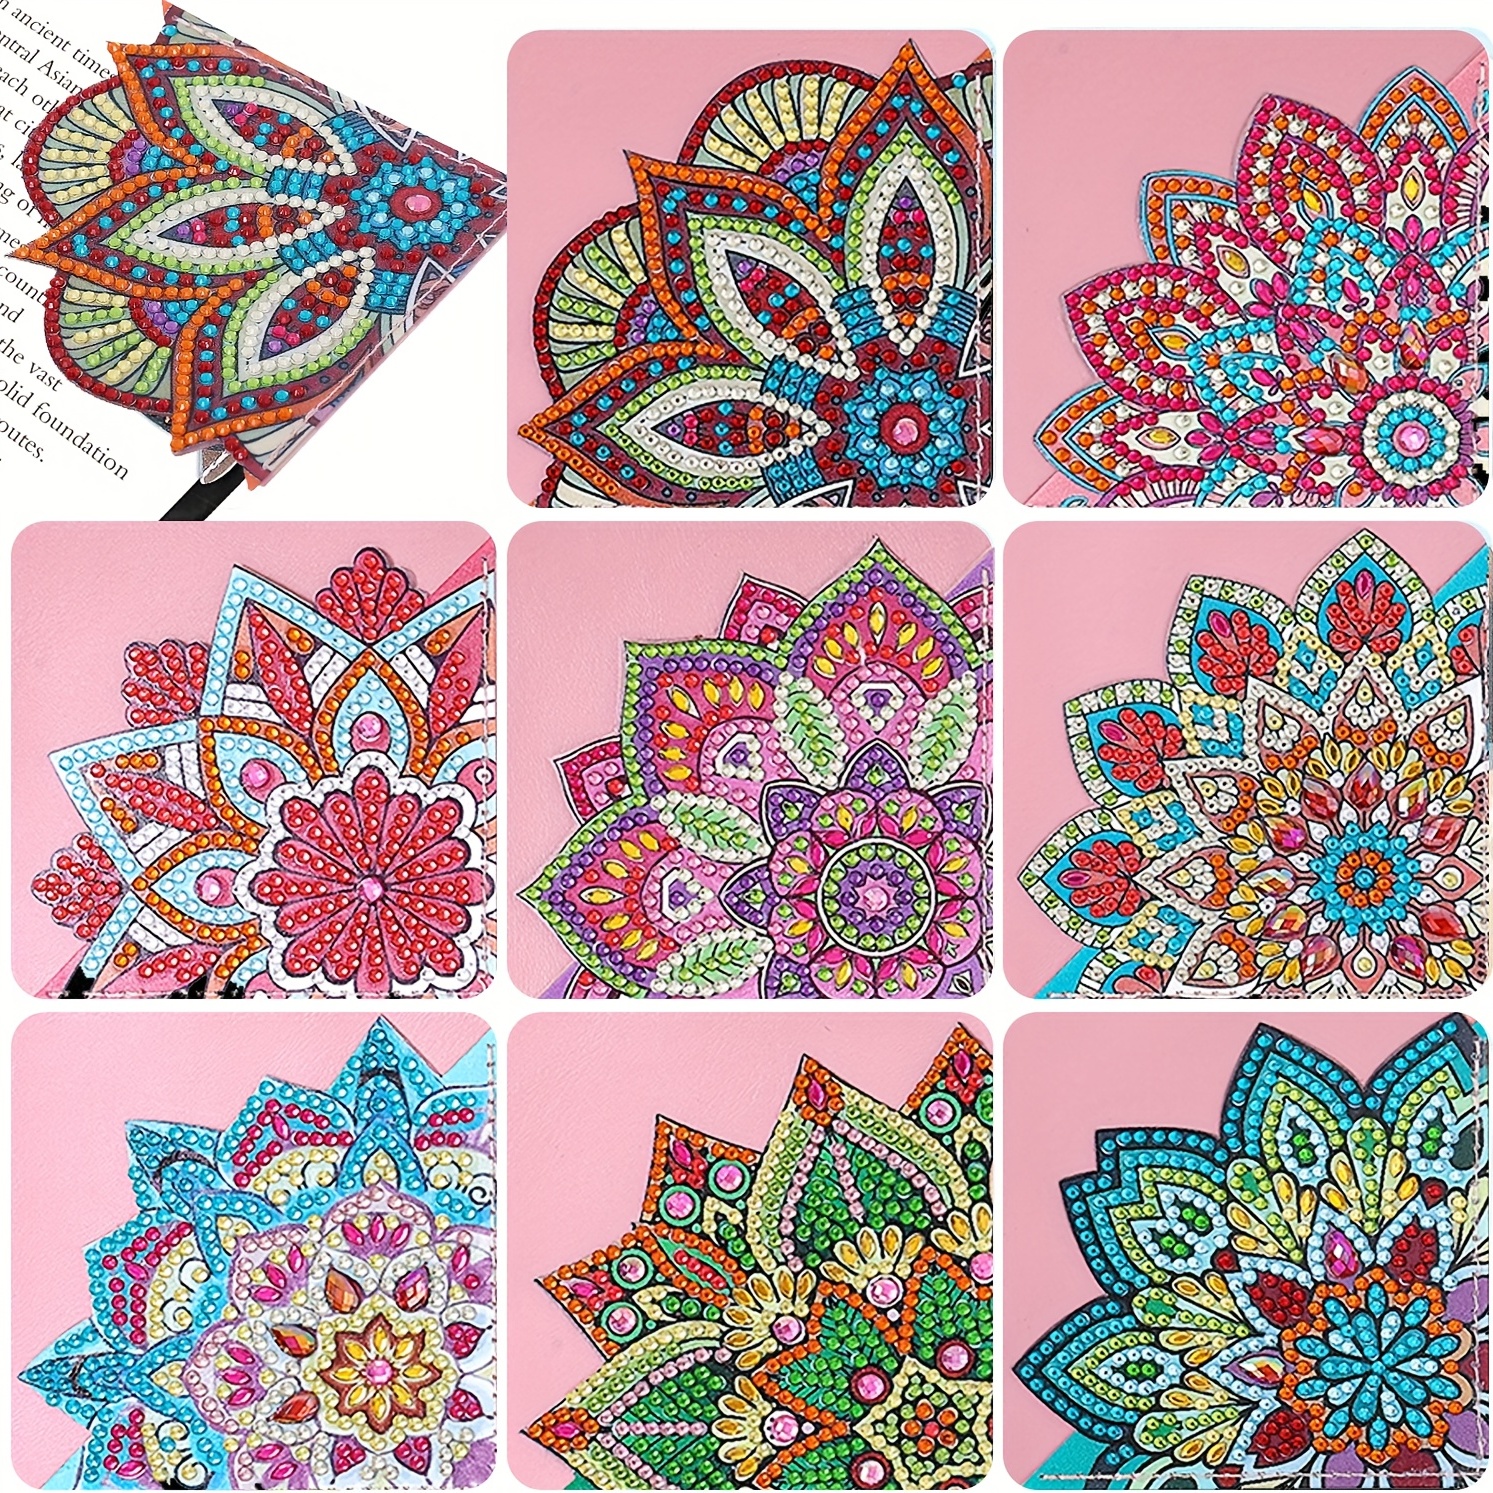 4 Pcs Mandala Diamond Painting Bookmarks For Kids,diy Corner Bookmark  Triangle 5d Diamond Painting Bookmarks Crafts Gifts